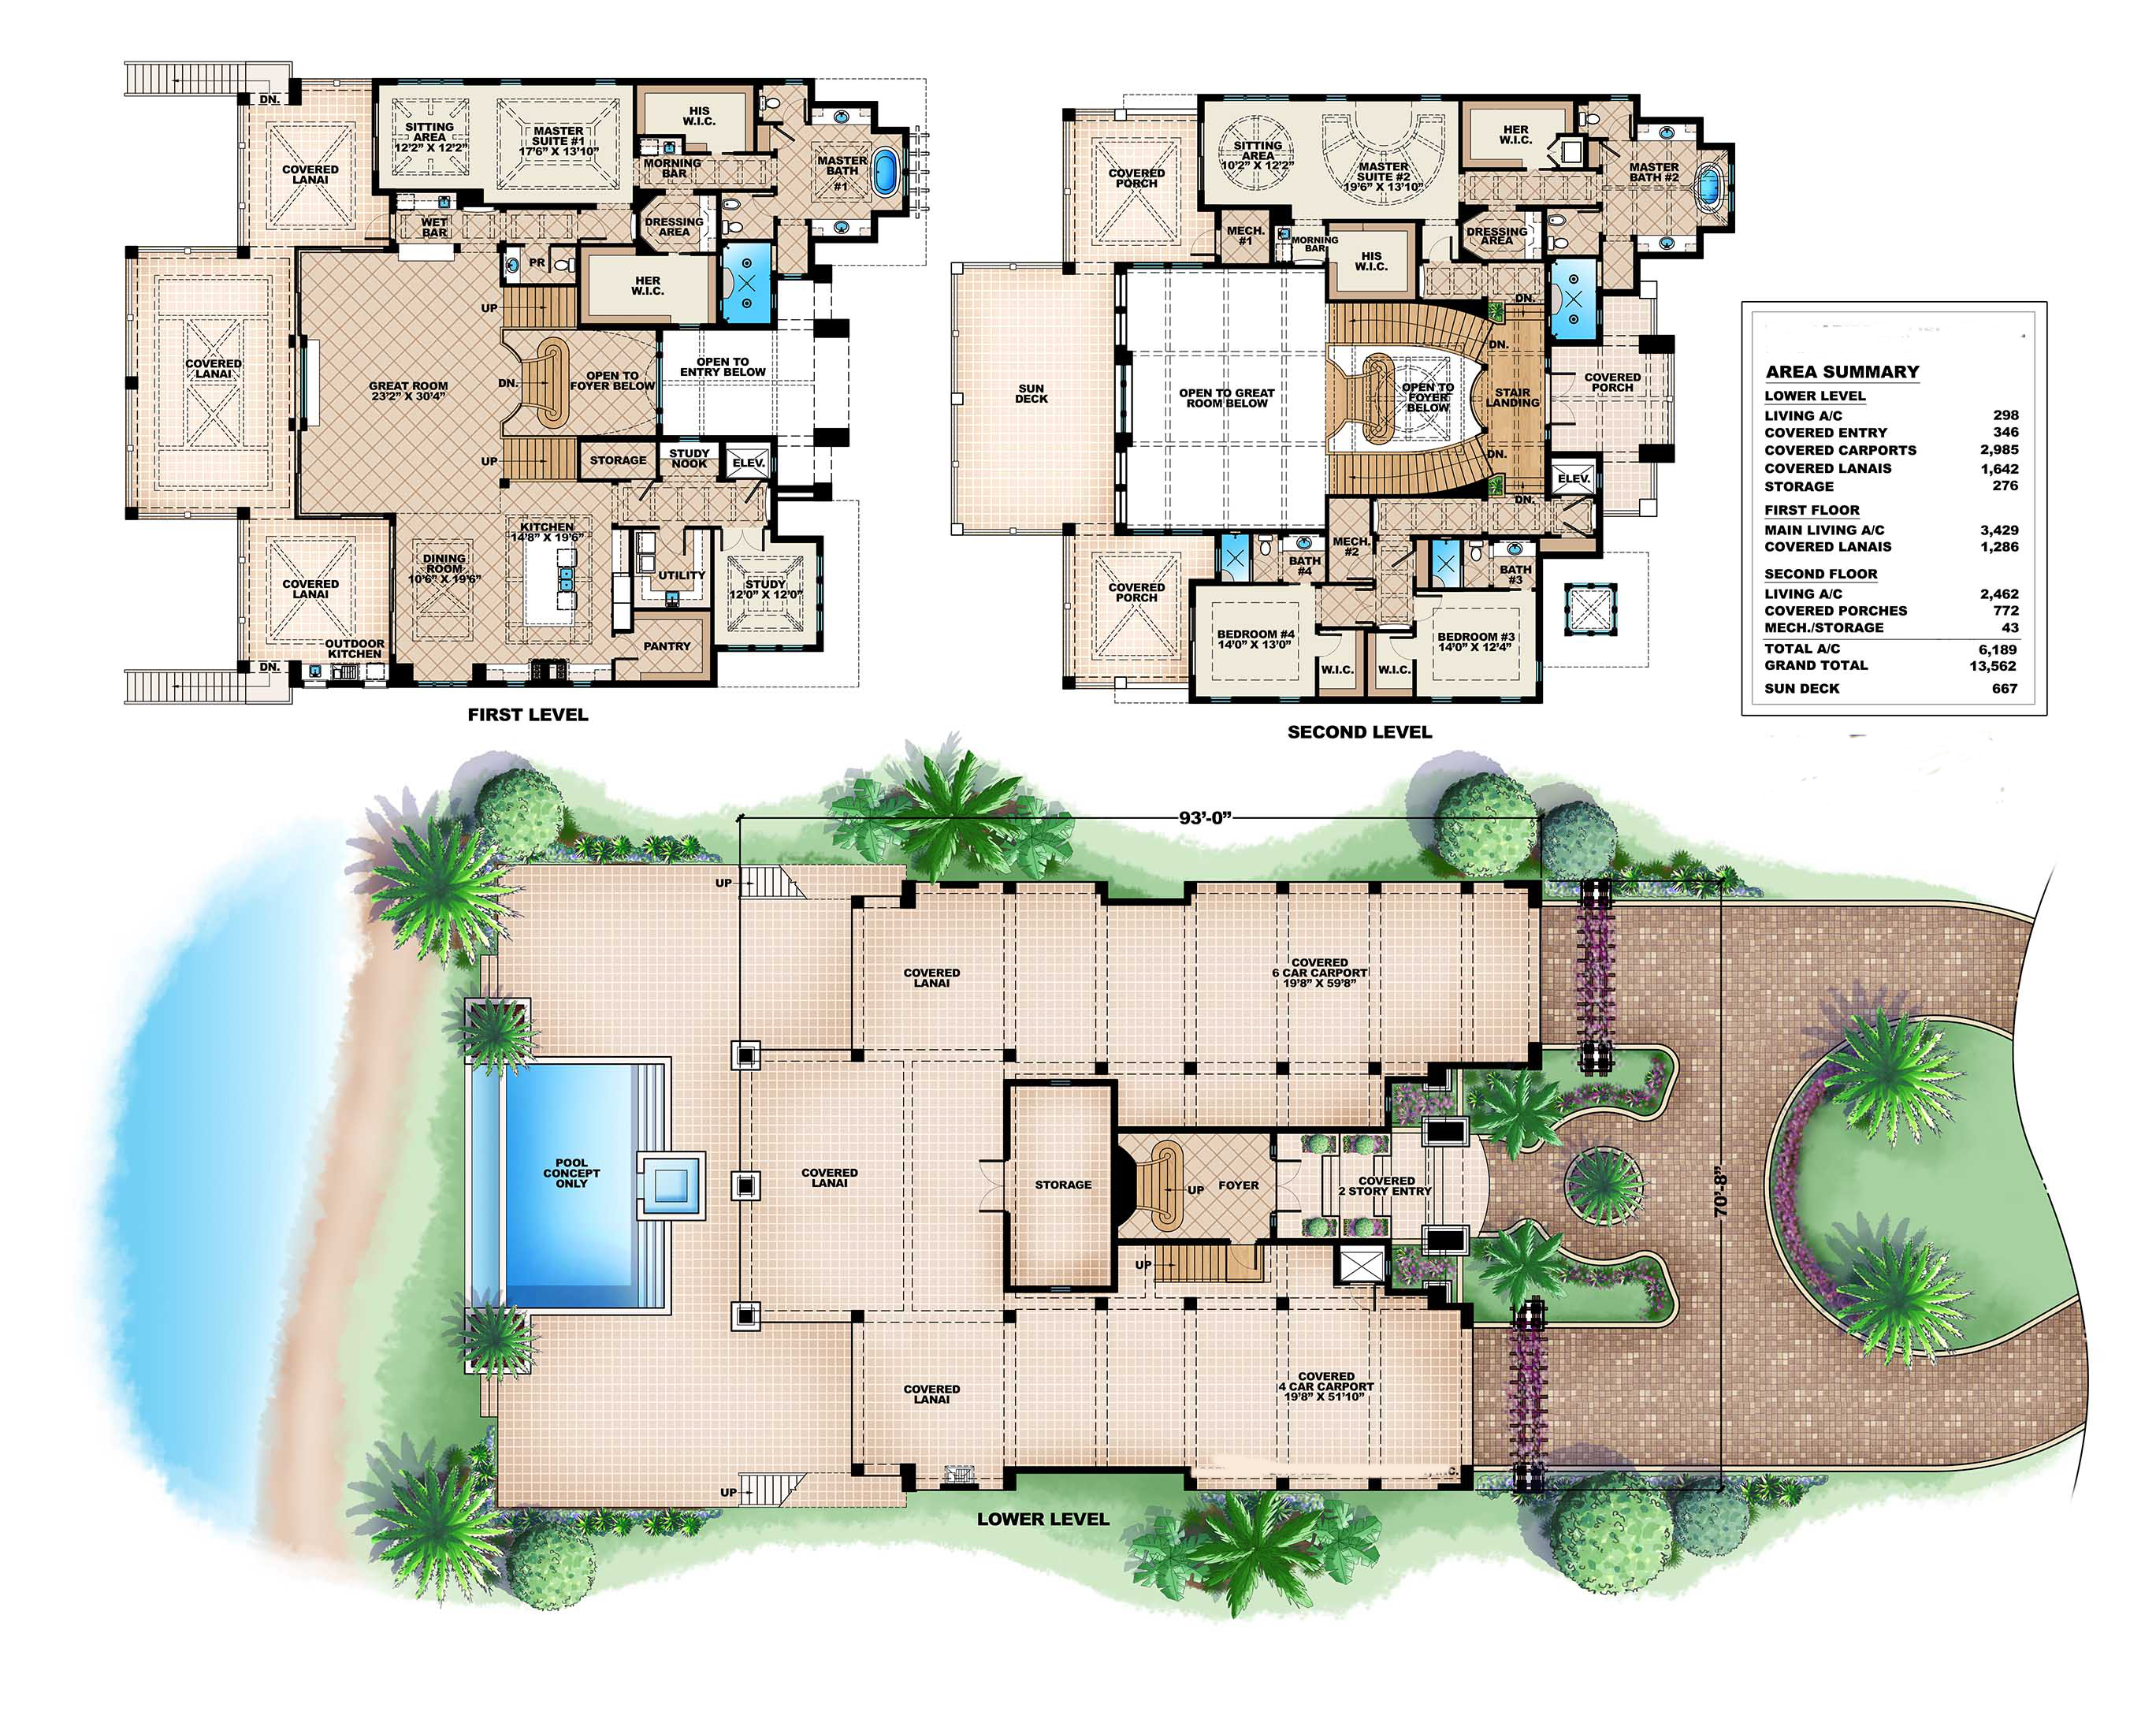  Luxury  House  Plan  175 1109 4 Bedrm 6189 Sq Ft Home 